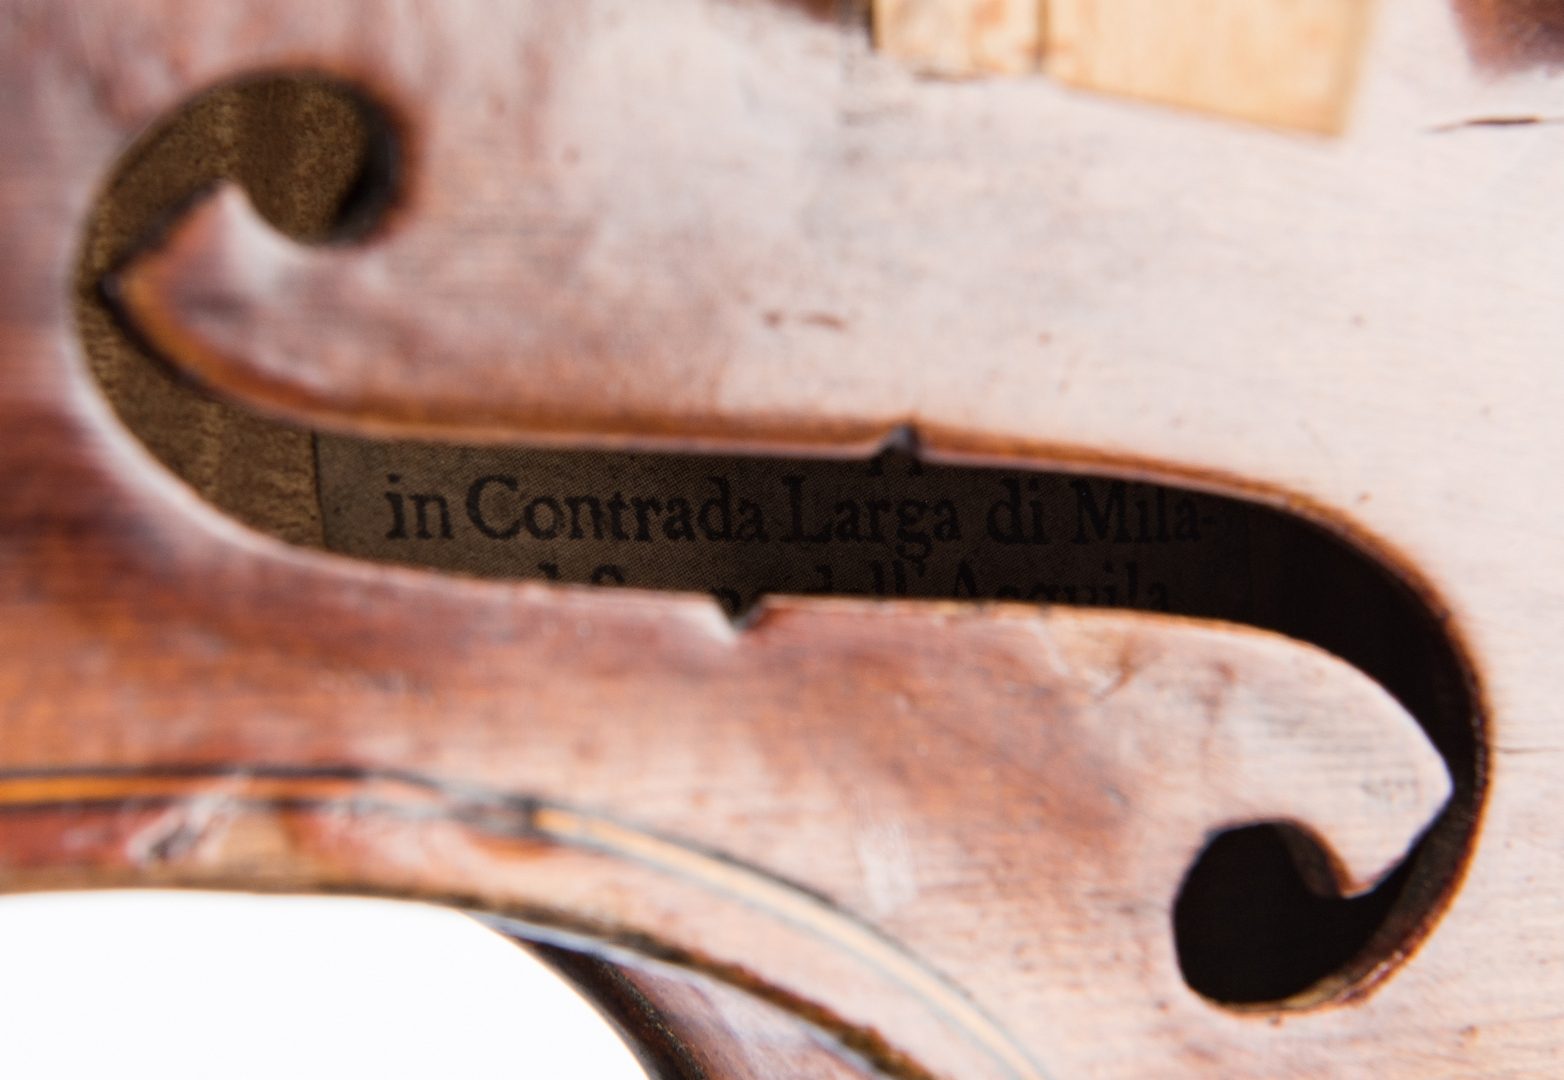 Lot 734: Early 19th Century Violin, after Testore